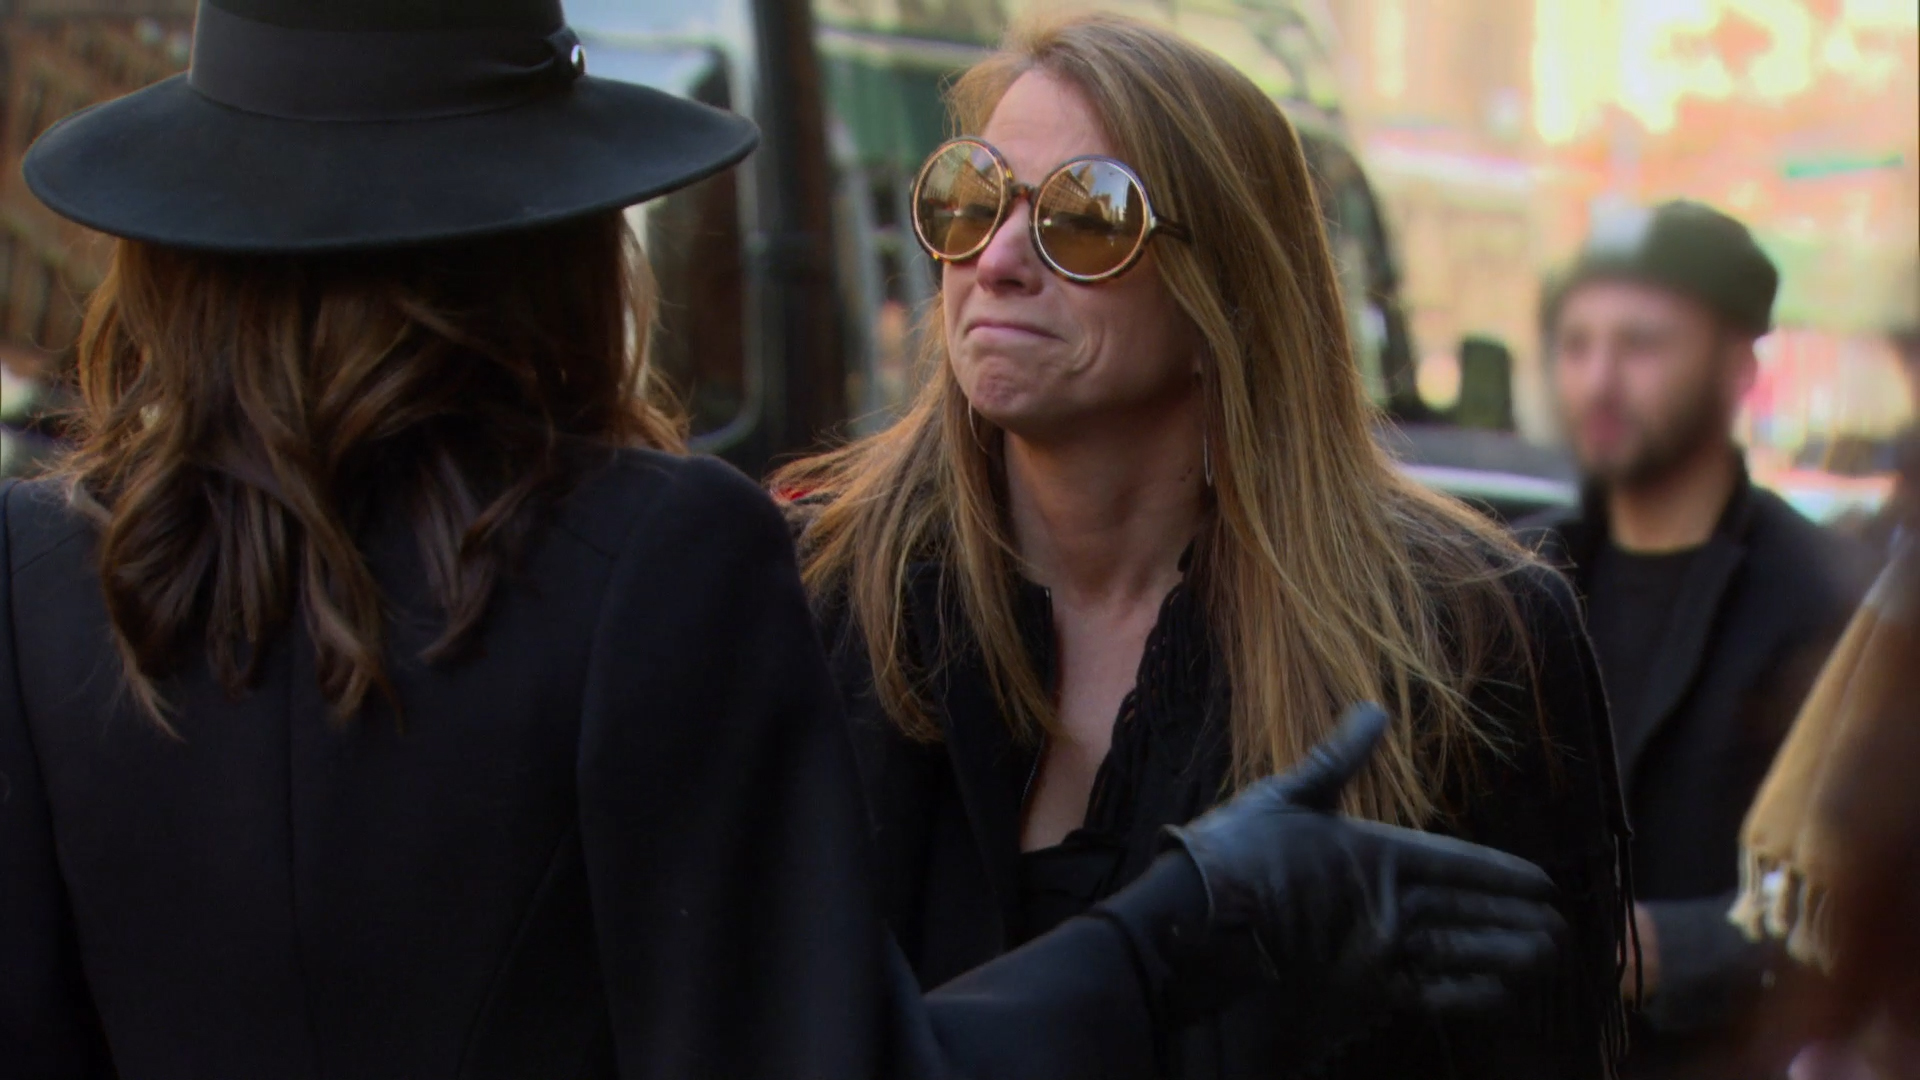 Jill Zarin Accuses ‘RHONY’ Production of Committing Criminal Acts At Bobby Zarin’s Funeral